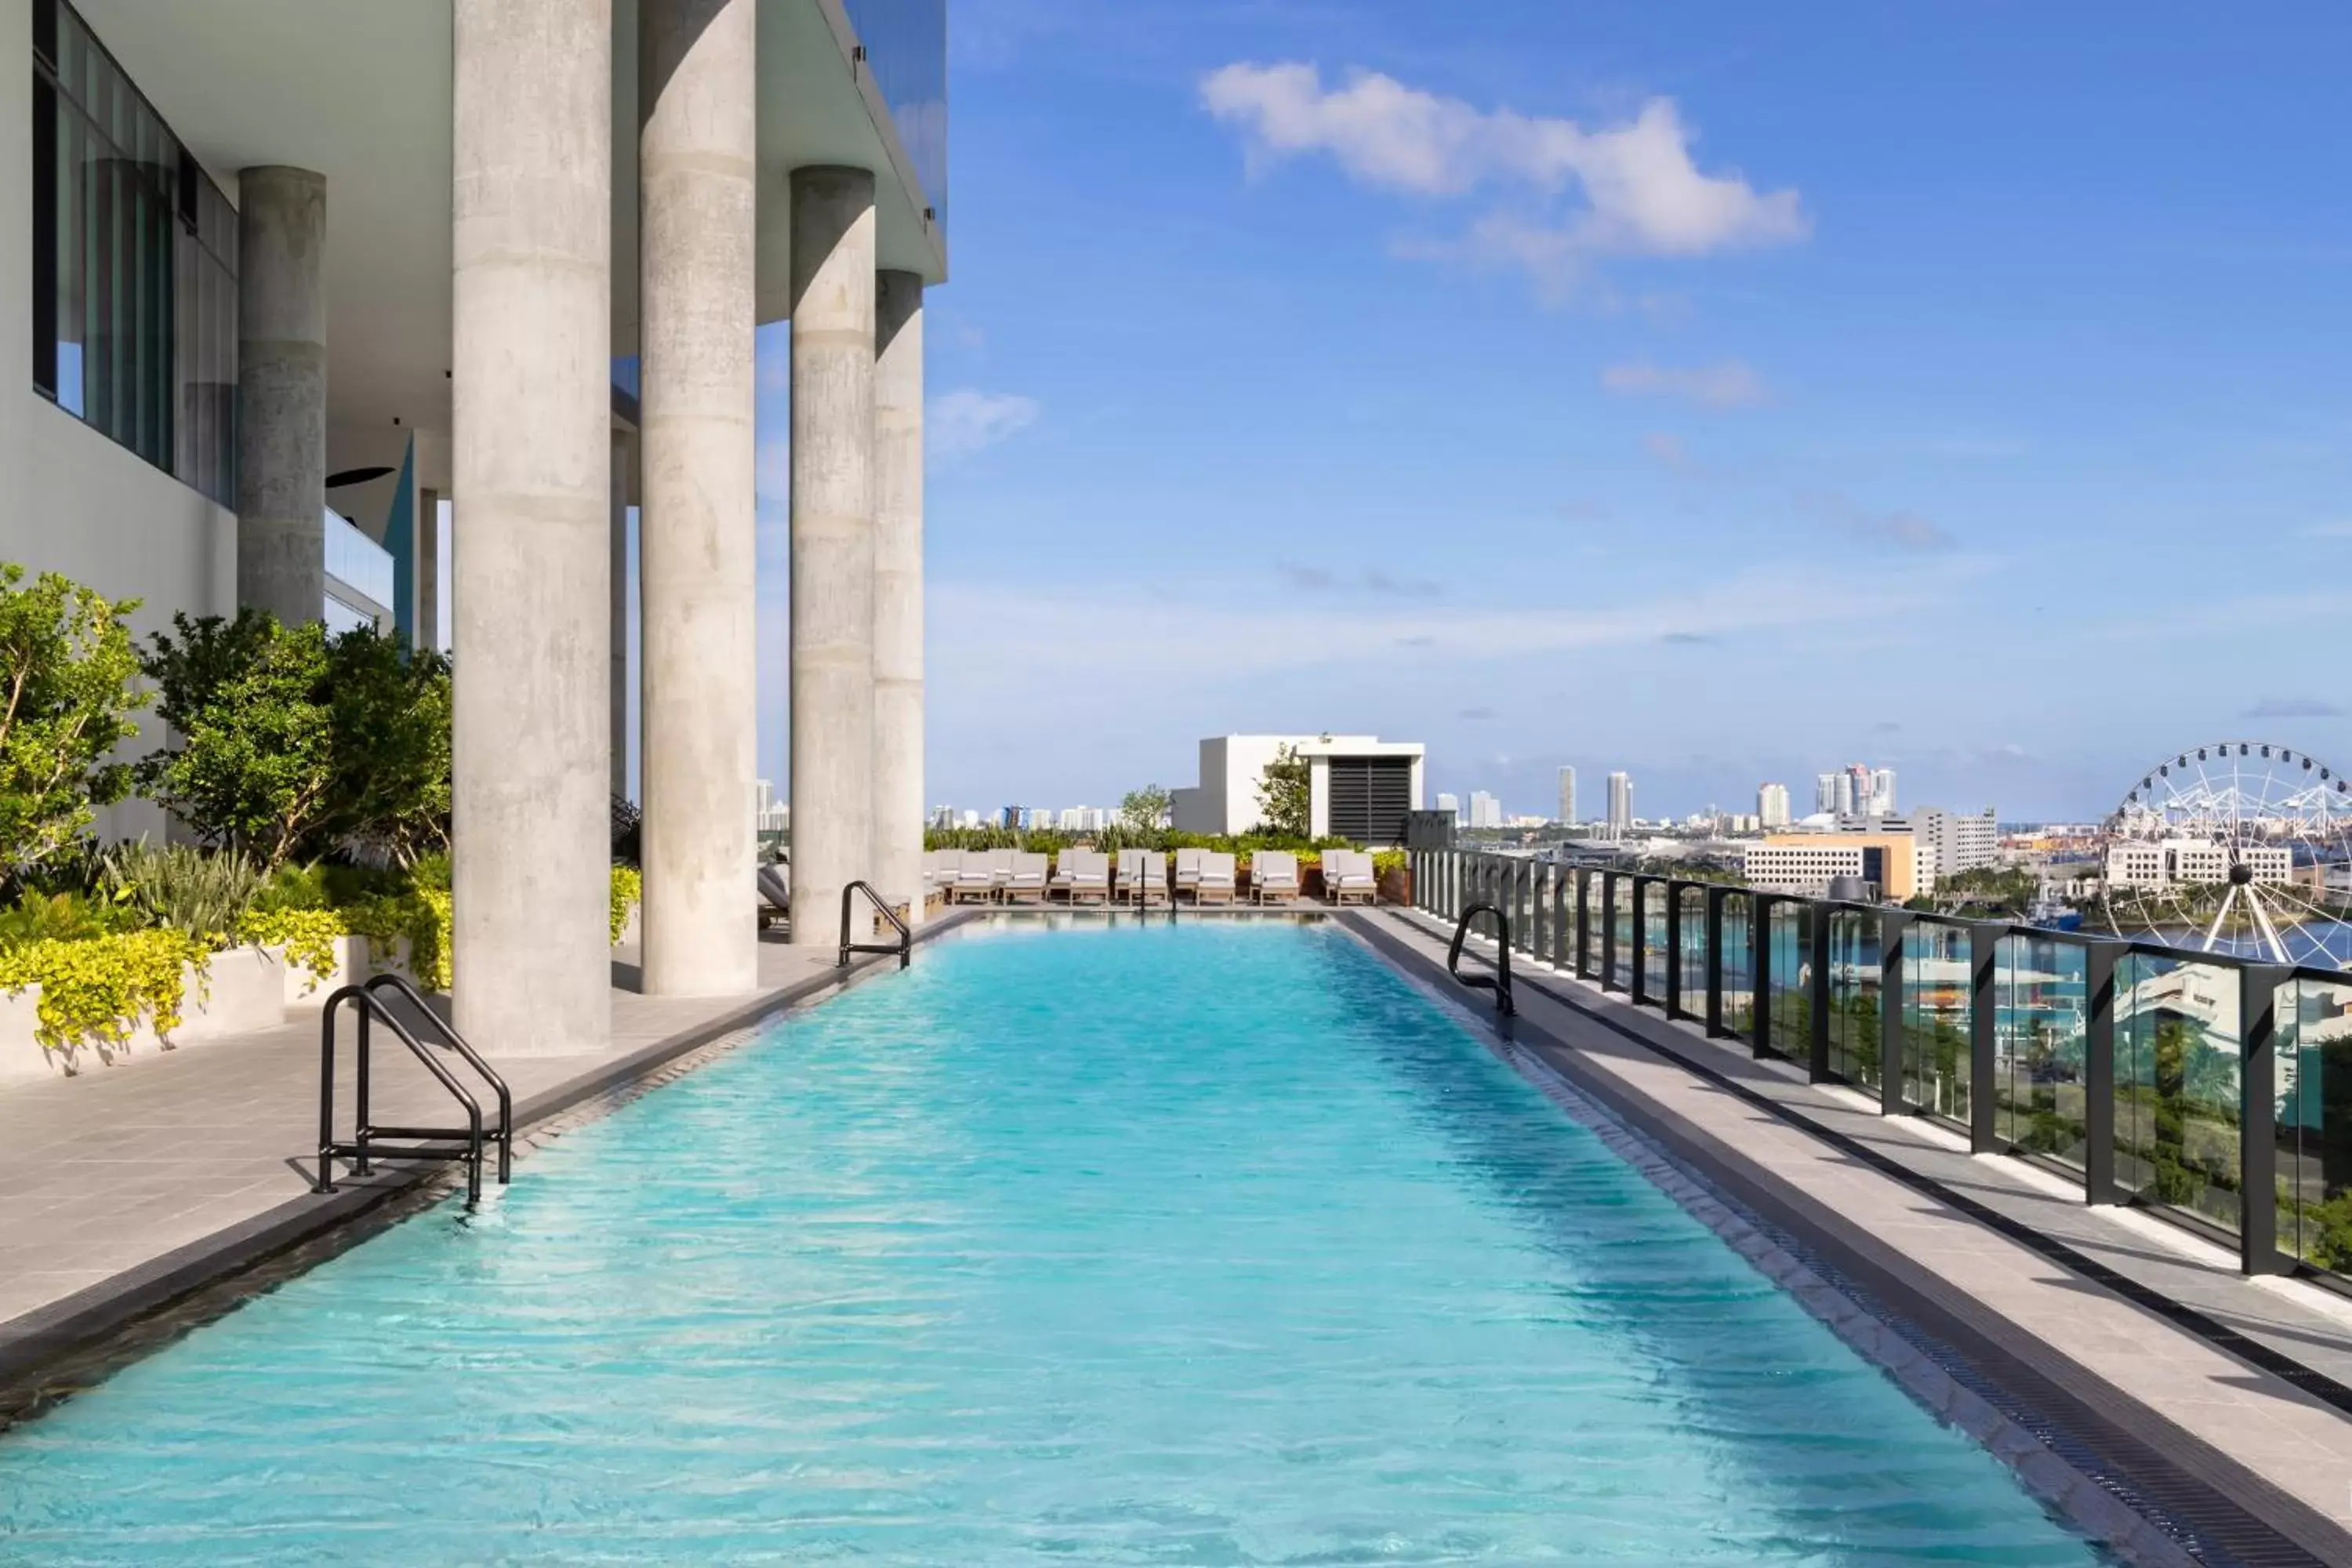 Property building, Swimming Pool in The Elser Hotel Miami